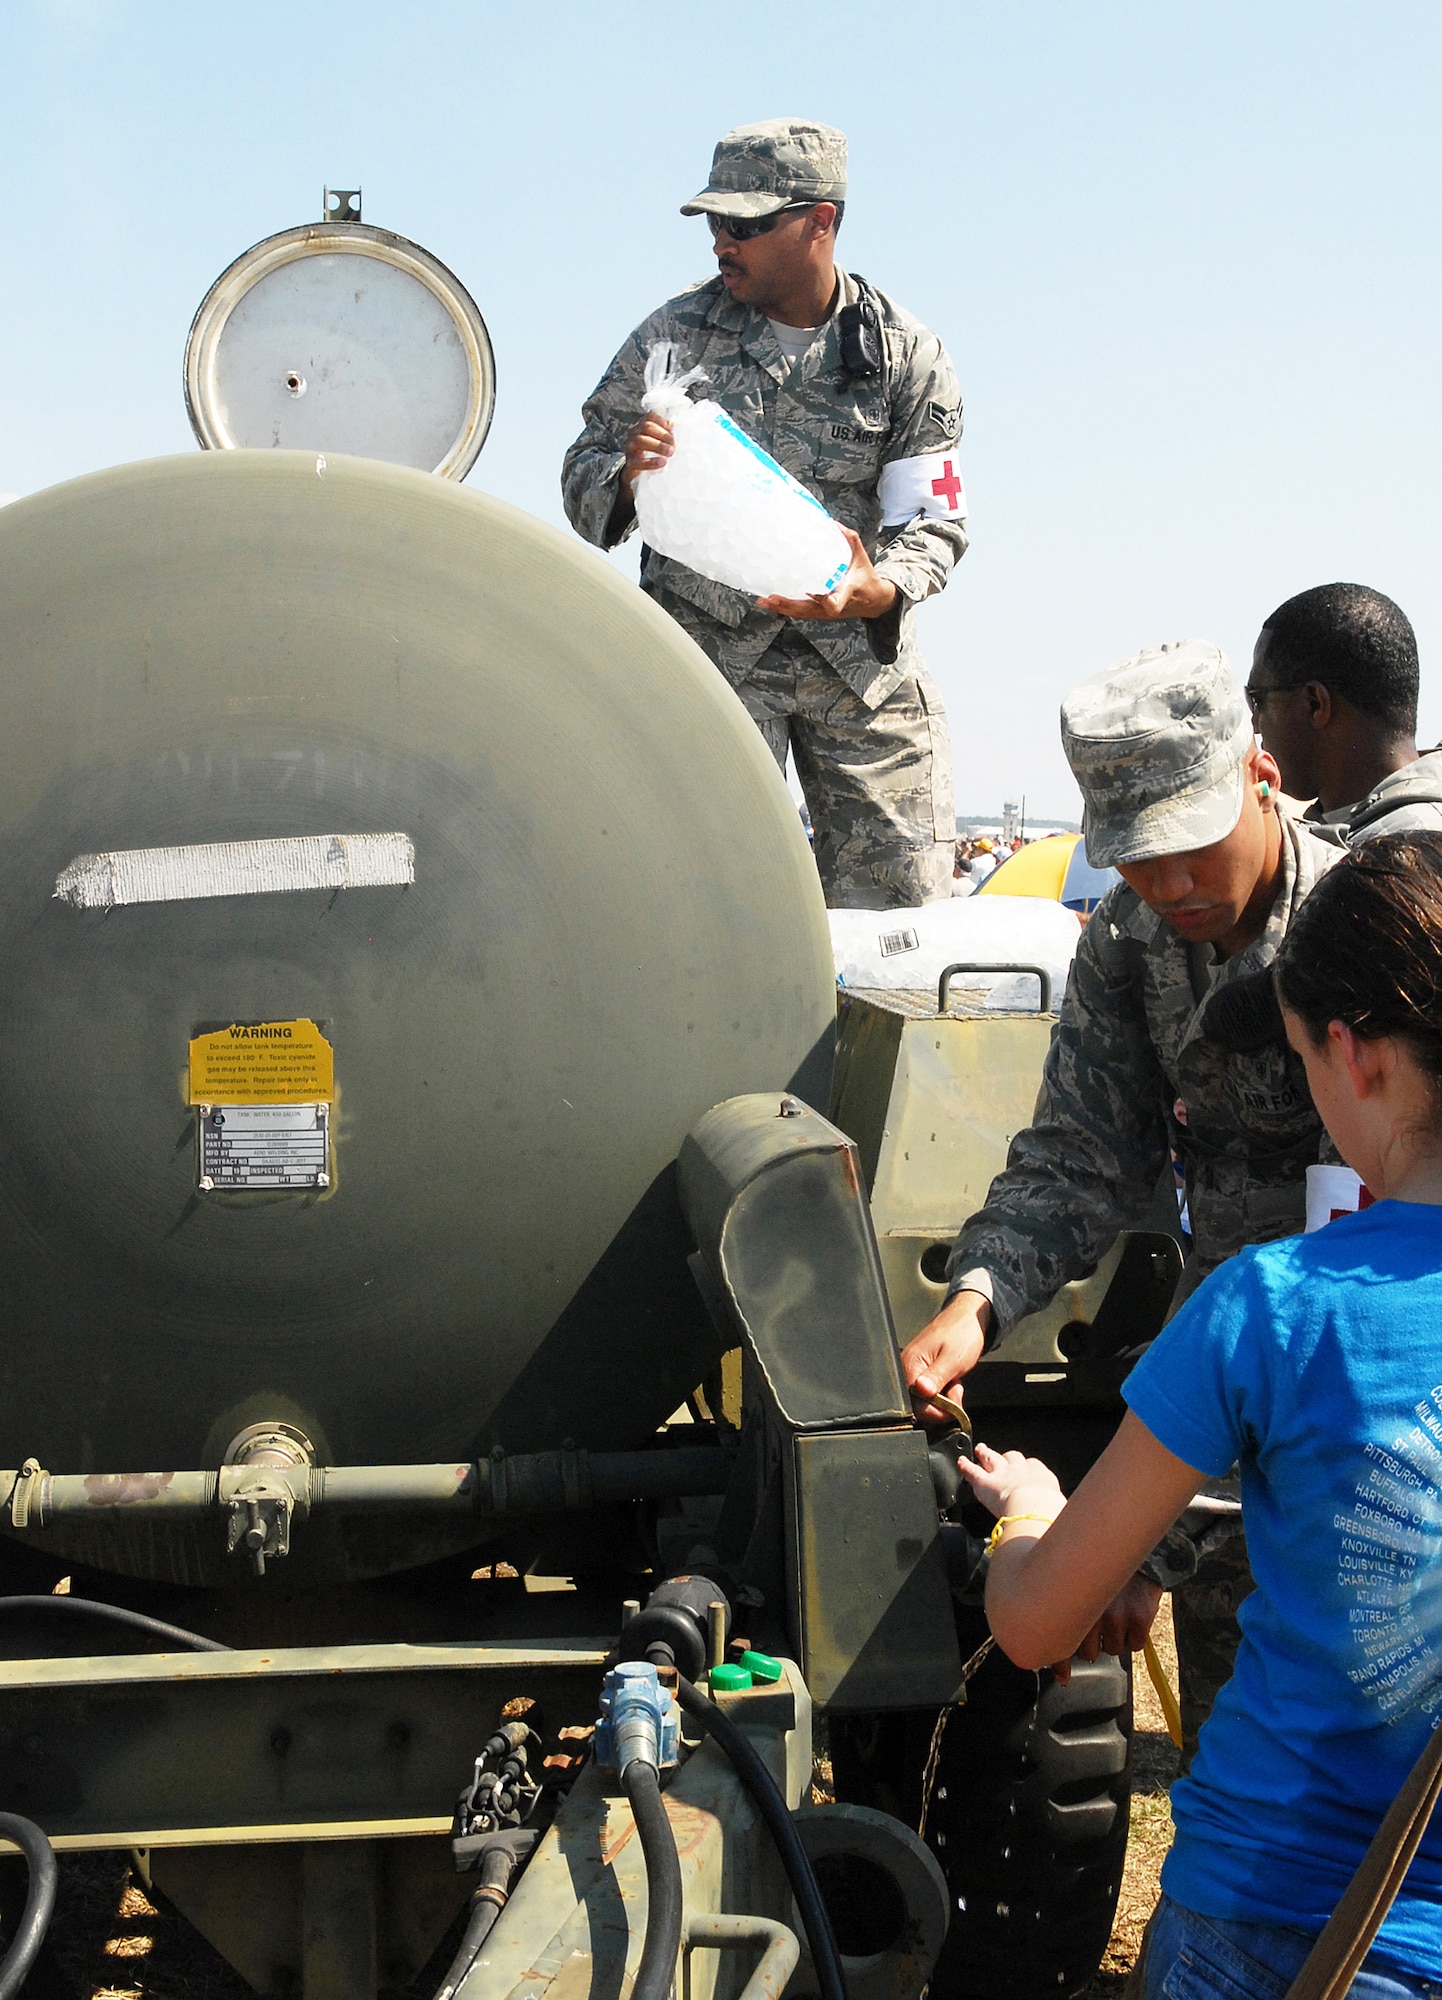 Airman 1st Class Darryl Adams, top center, 78th Medical Group, adds ice to a drinking water supply tank at Robins Air Show 2012 (U. S. Air Force photo by Sue Sapp)